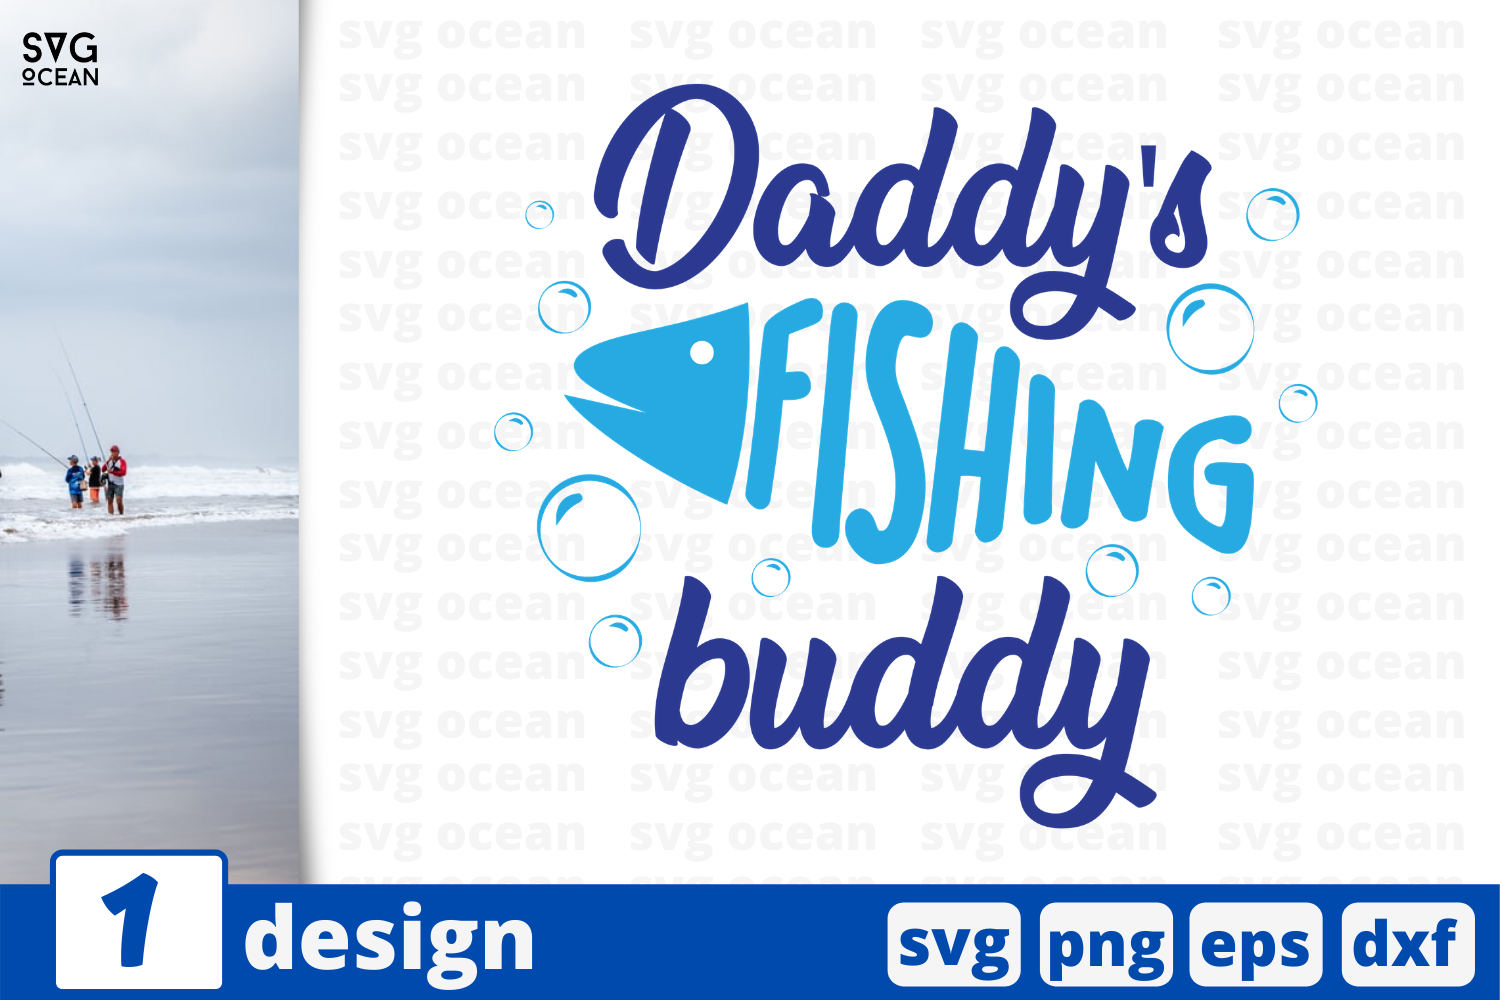 Download 1 Daddy S Fishing Buddy Svg Bundle Quotes Cricut Svg By Svgocean Thehungryjpeg Com